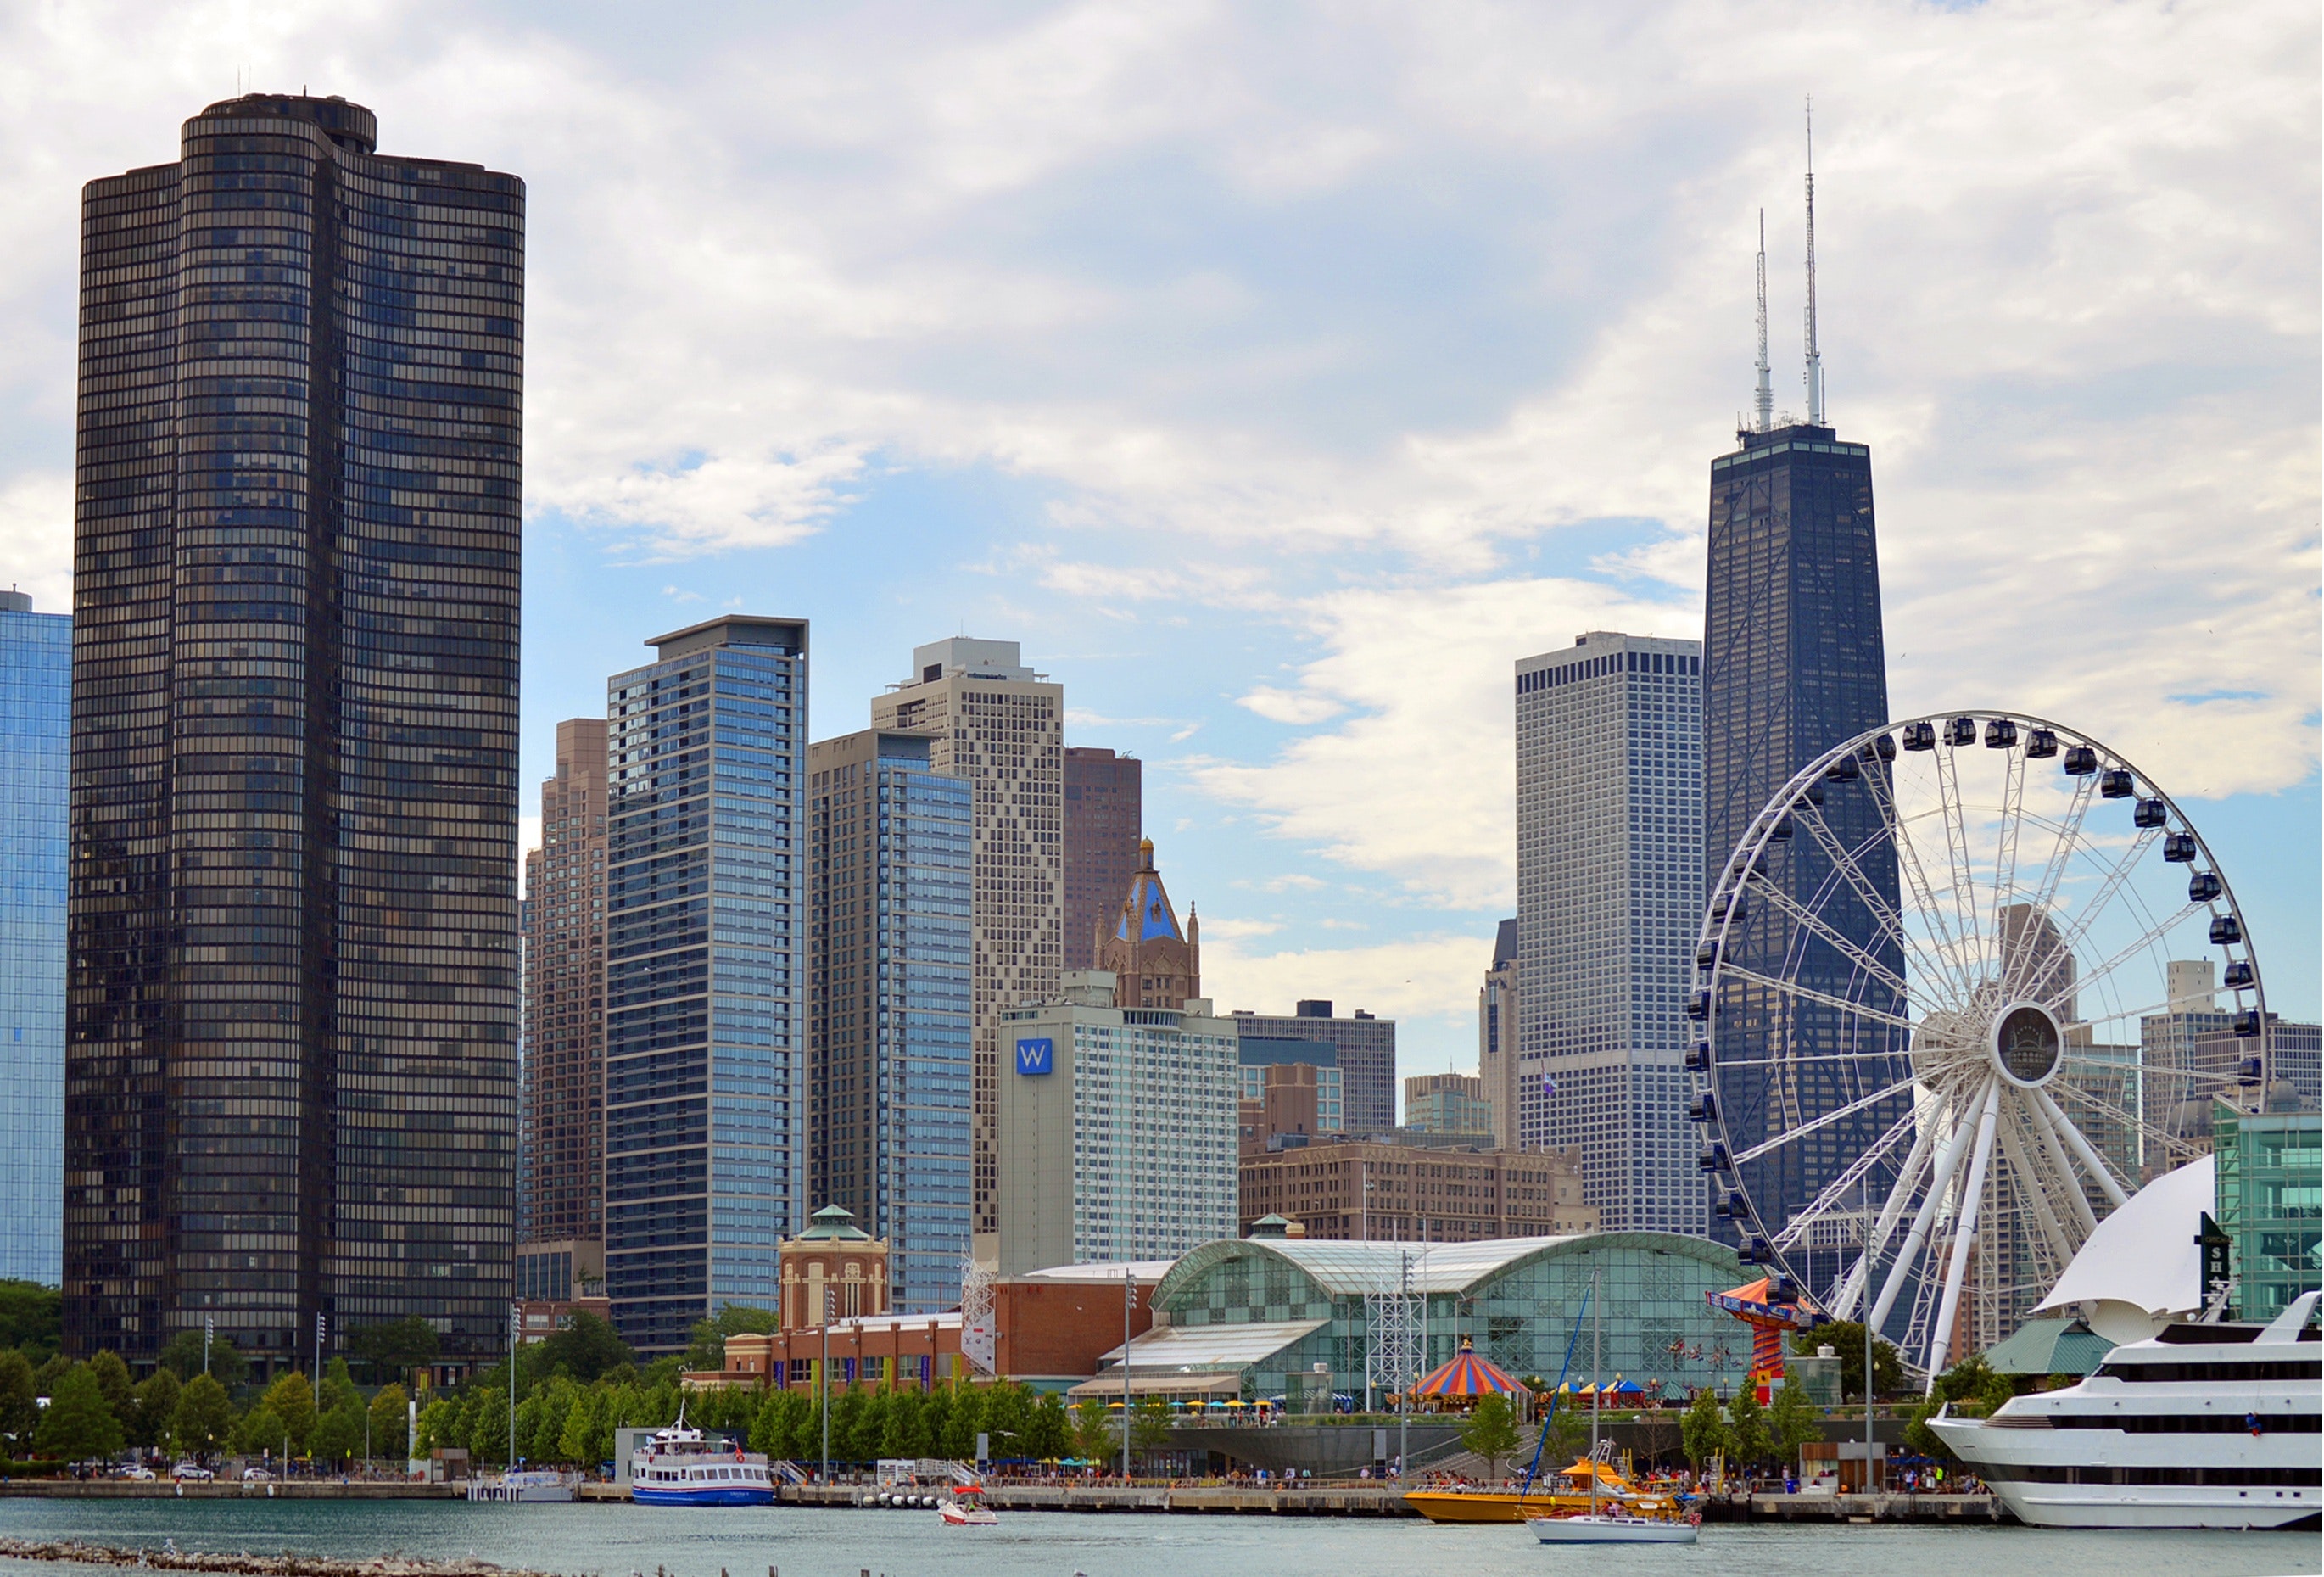 The Best Chicago River Tour